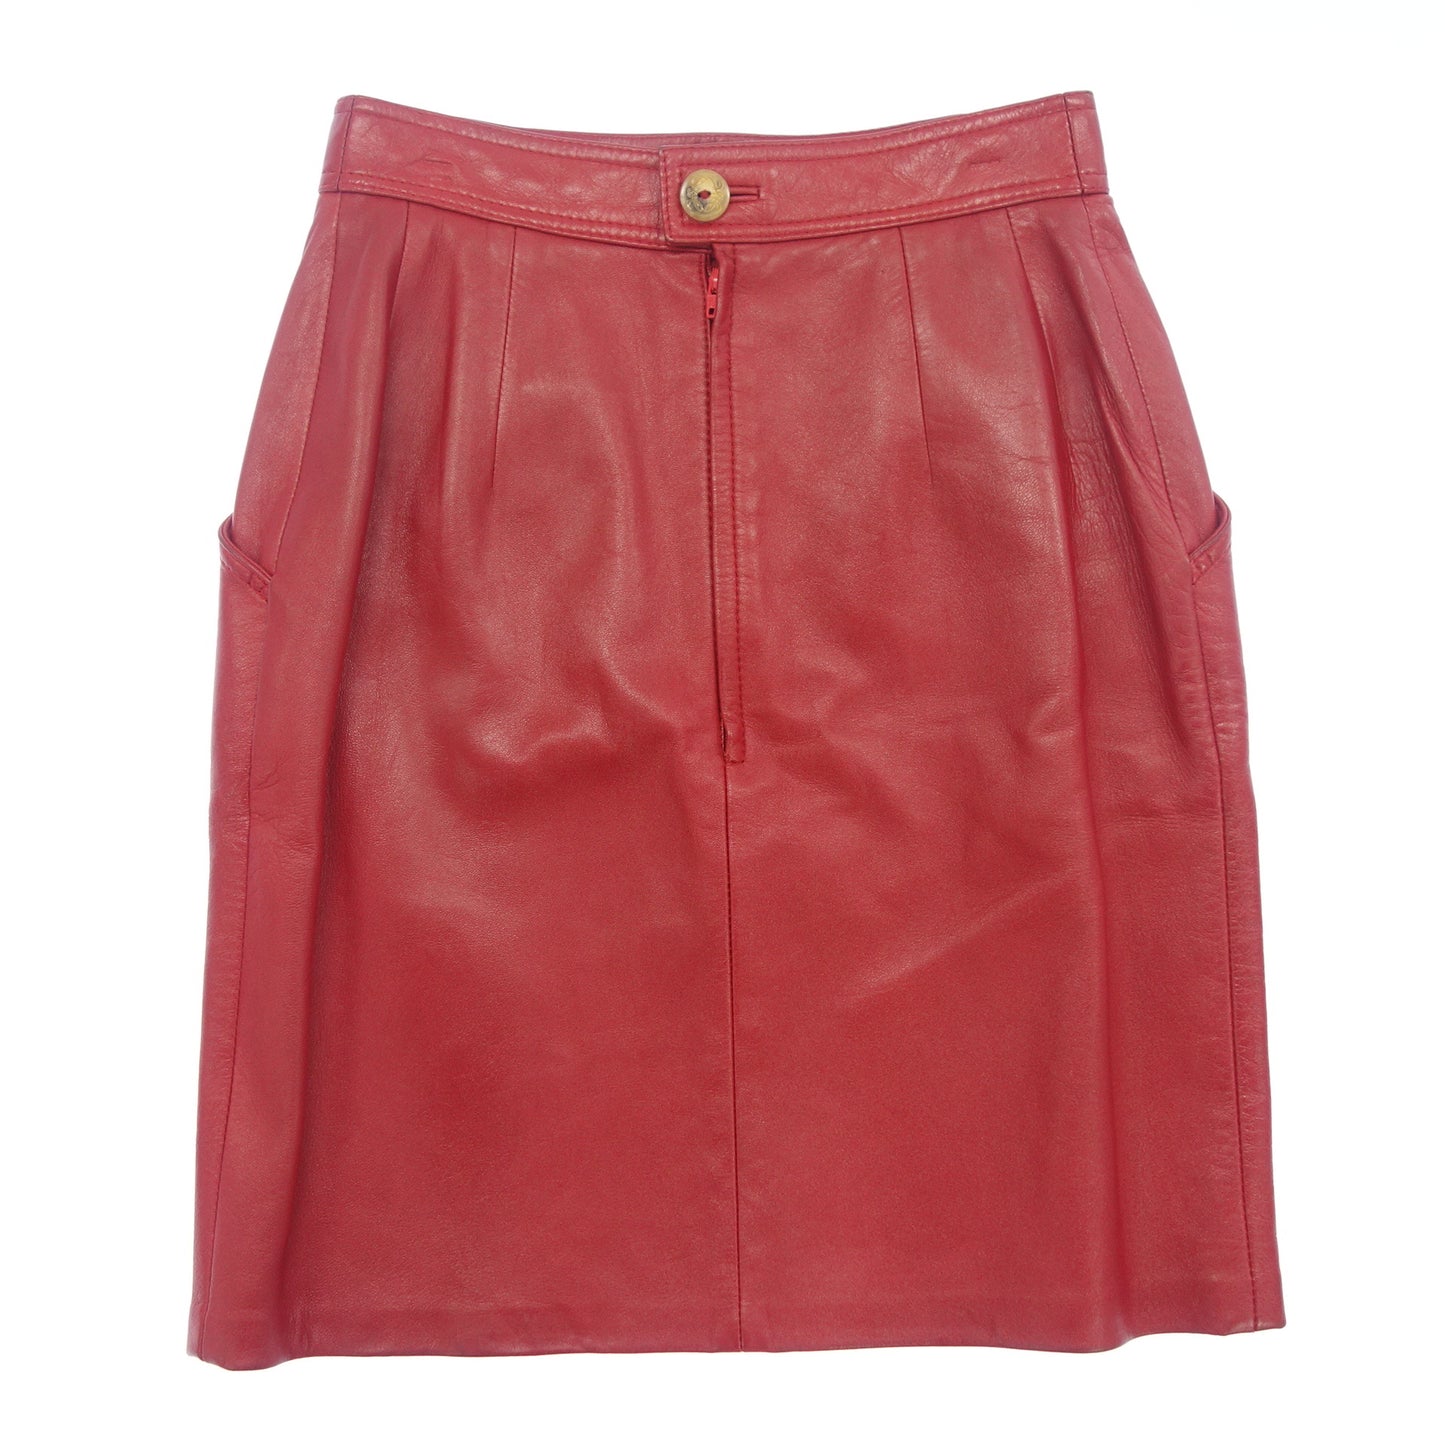 Used LOEWE Leather Skirt Anagram Nappa Leather Women's Red Size 38 LOEWE [AFB42] 